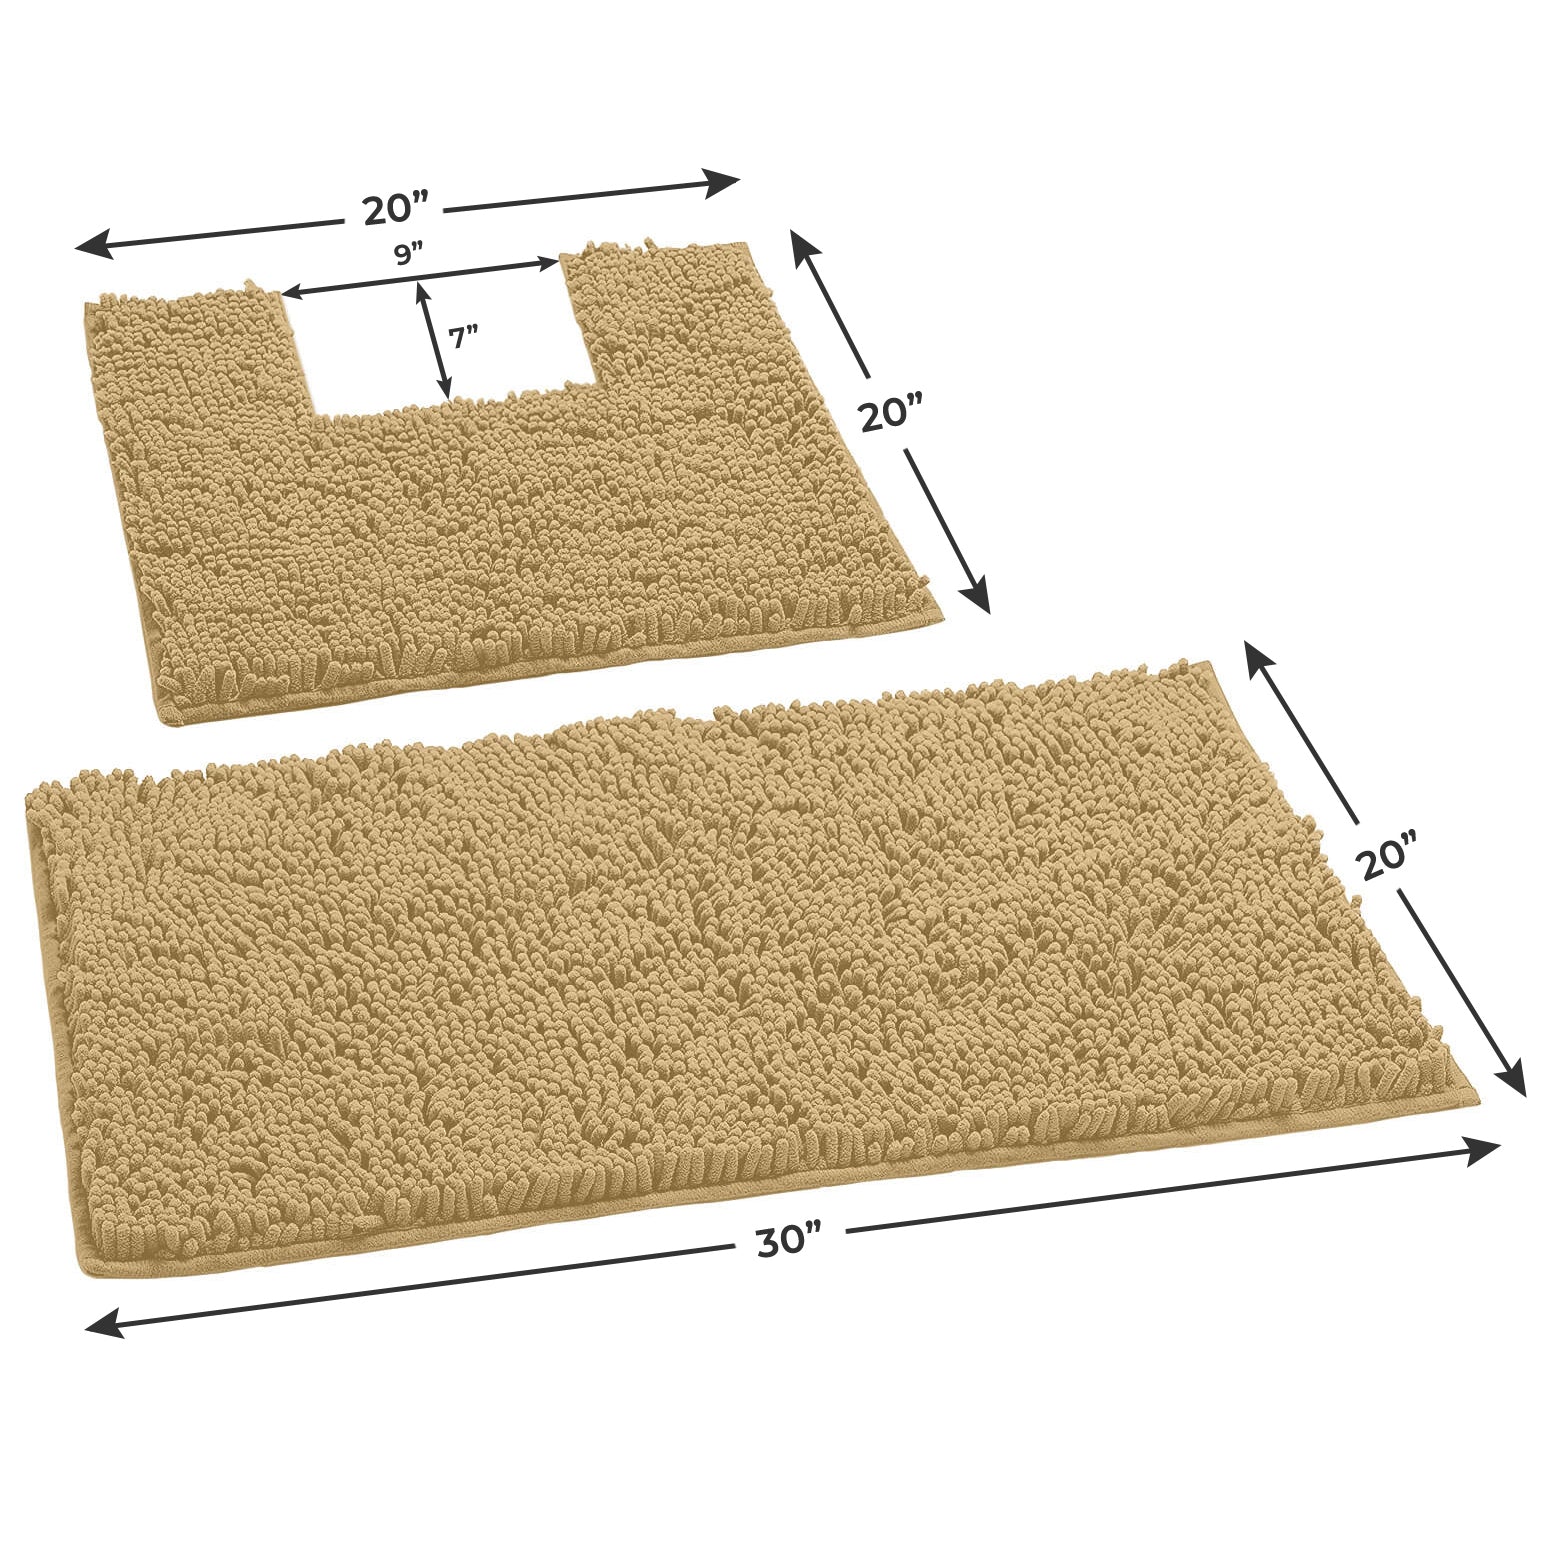 Pedestal Mats: A Buying Guide for Toilet Mats – Allure Bath Fashions